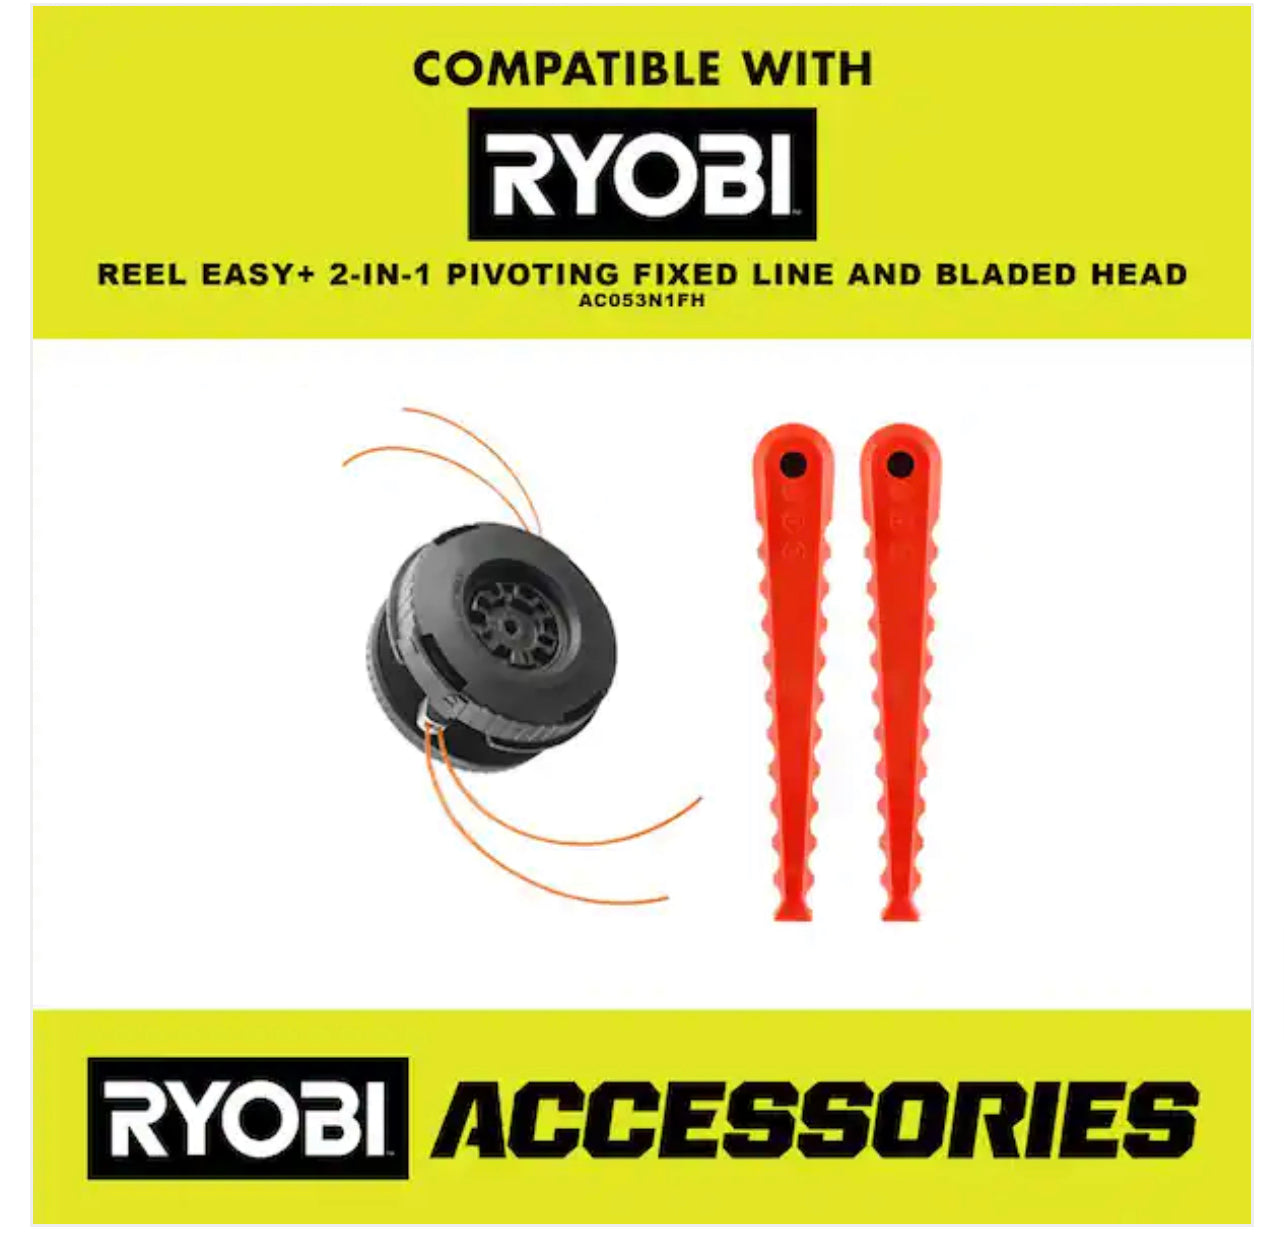 Ryobi REEL EASY+ .095 Pivoting Fixed Line Replacements (14-Pieces)